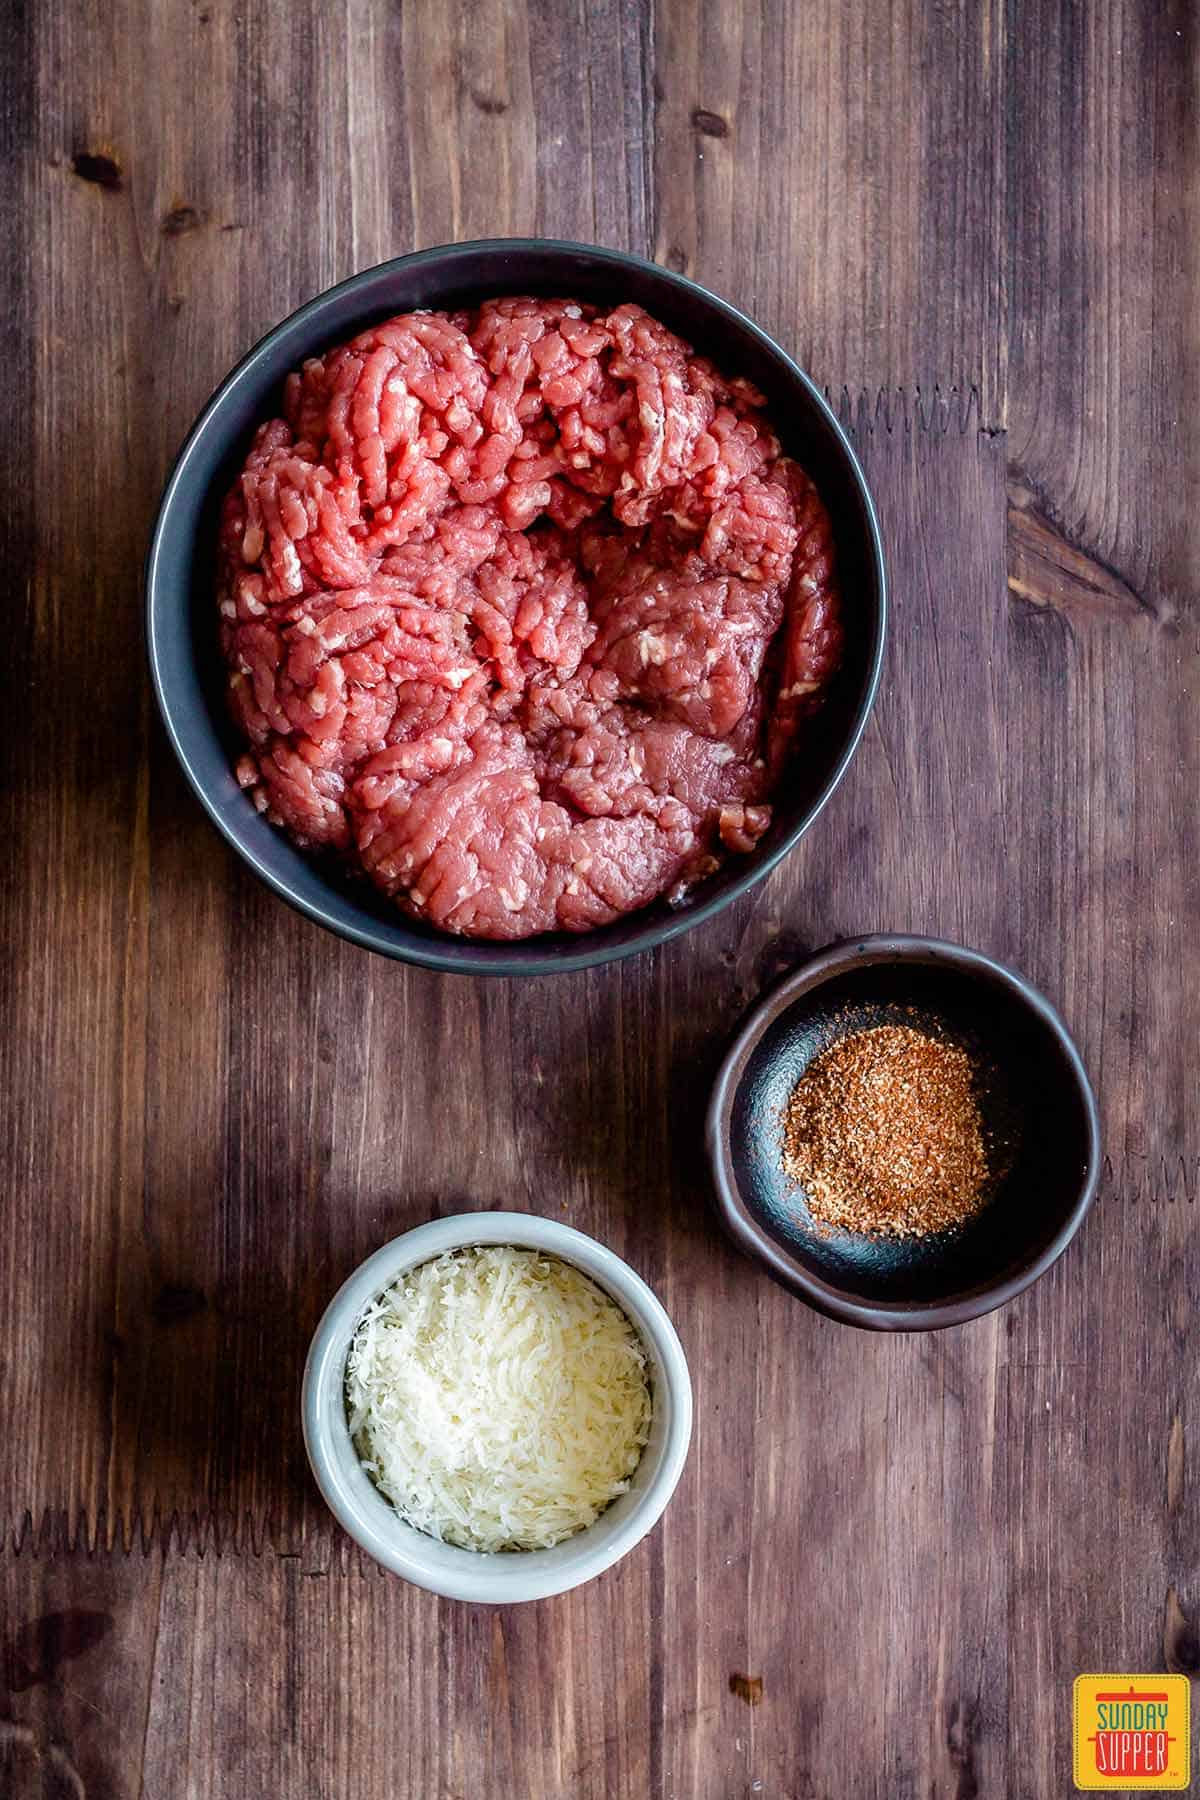 Burger meat with seasoning and parmesan in separate bowls